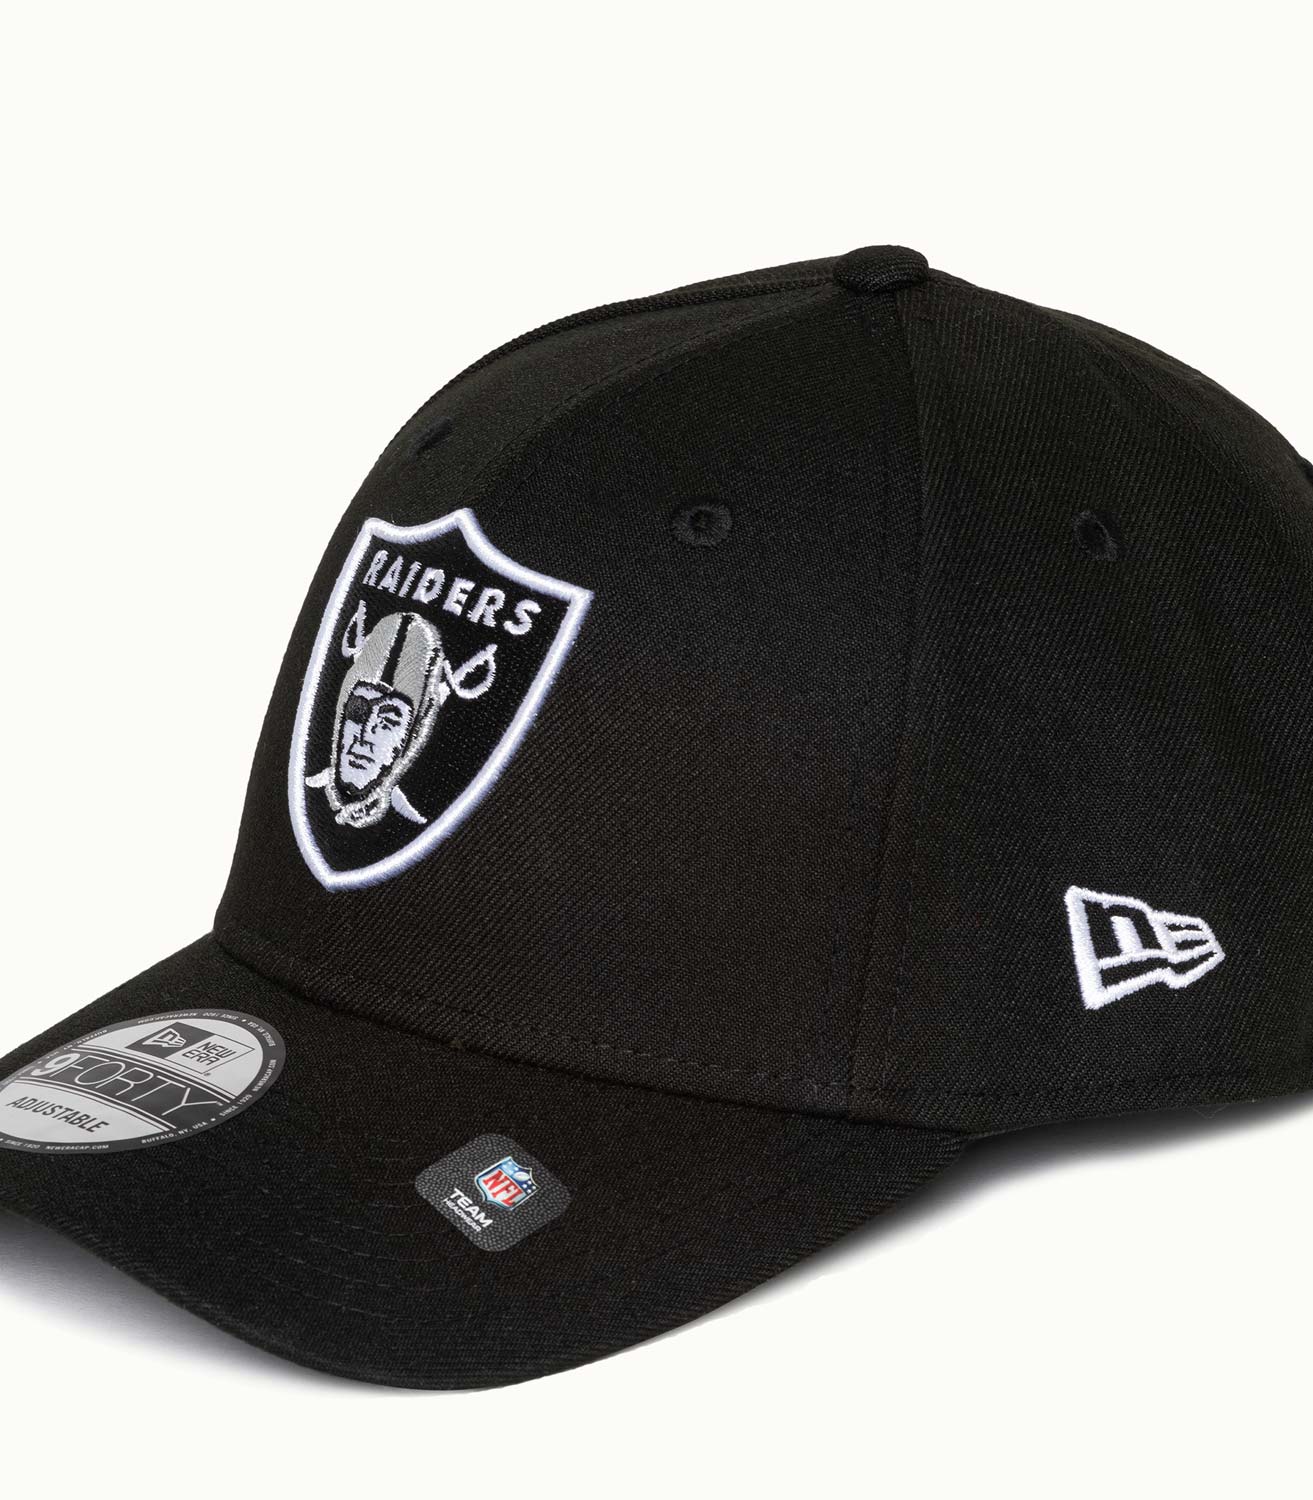 NEW ERA: BAGS AND ACCESSORIES, NEW ERA HOME FIELD 9FORTY LAS VEGAS